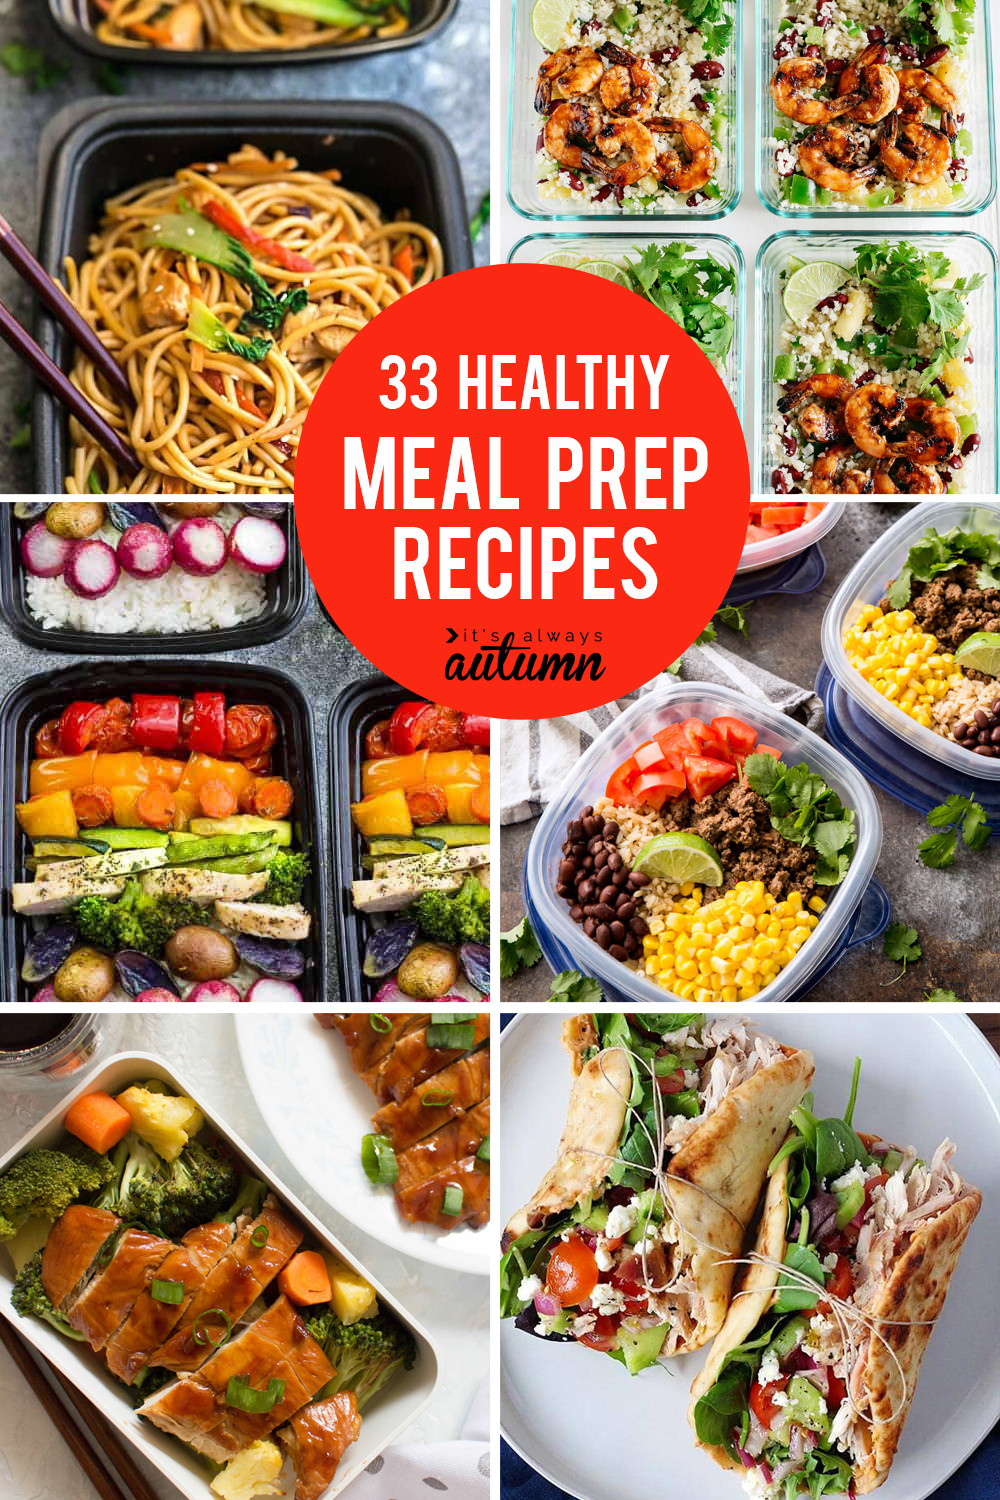 Make Ahead Healthy Lunches
 33 delicious meal prep recipes for healthy lunches that